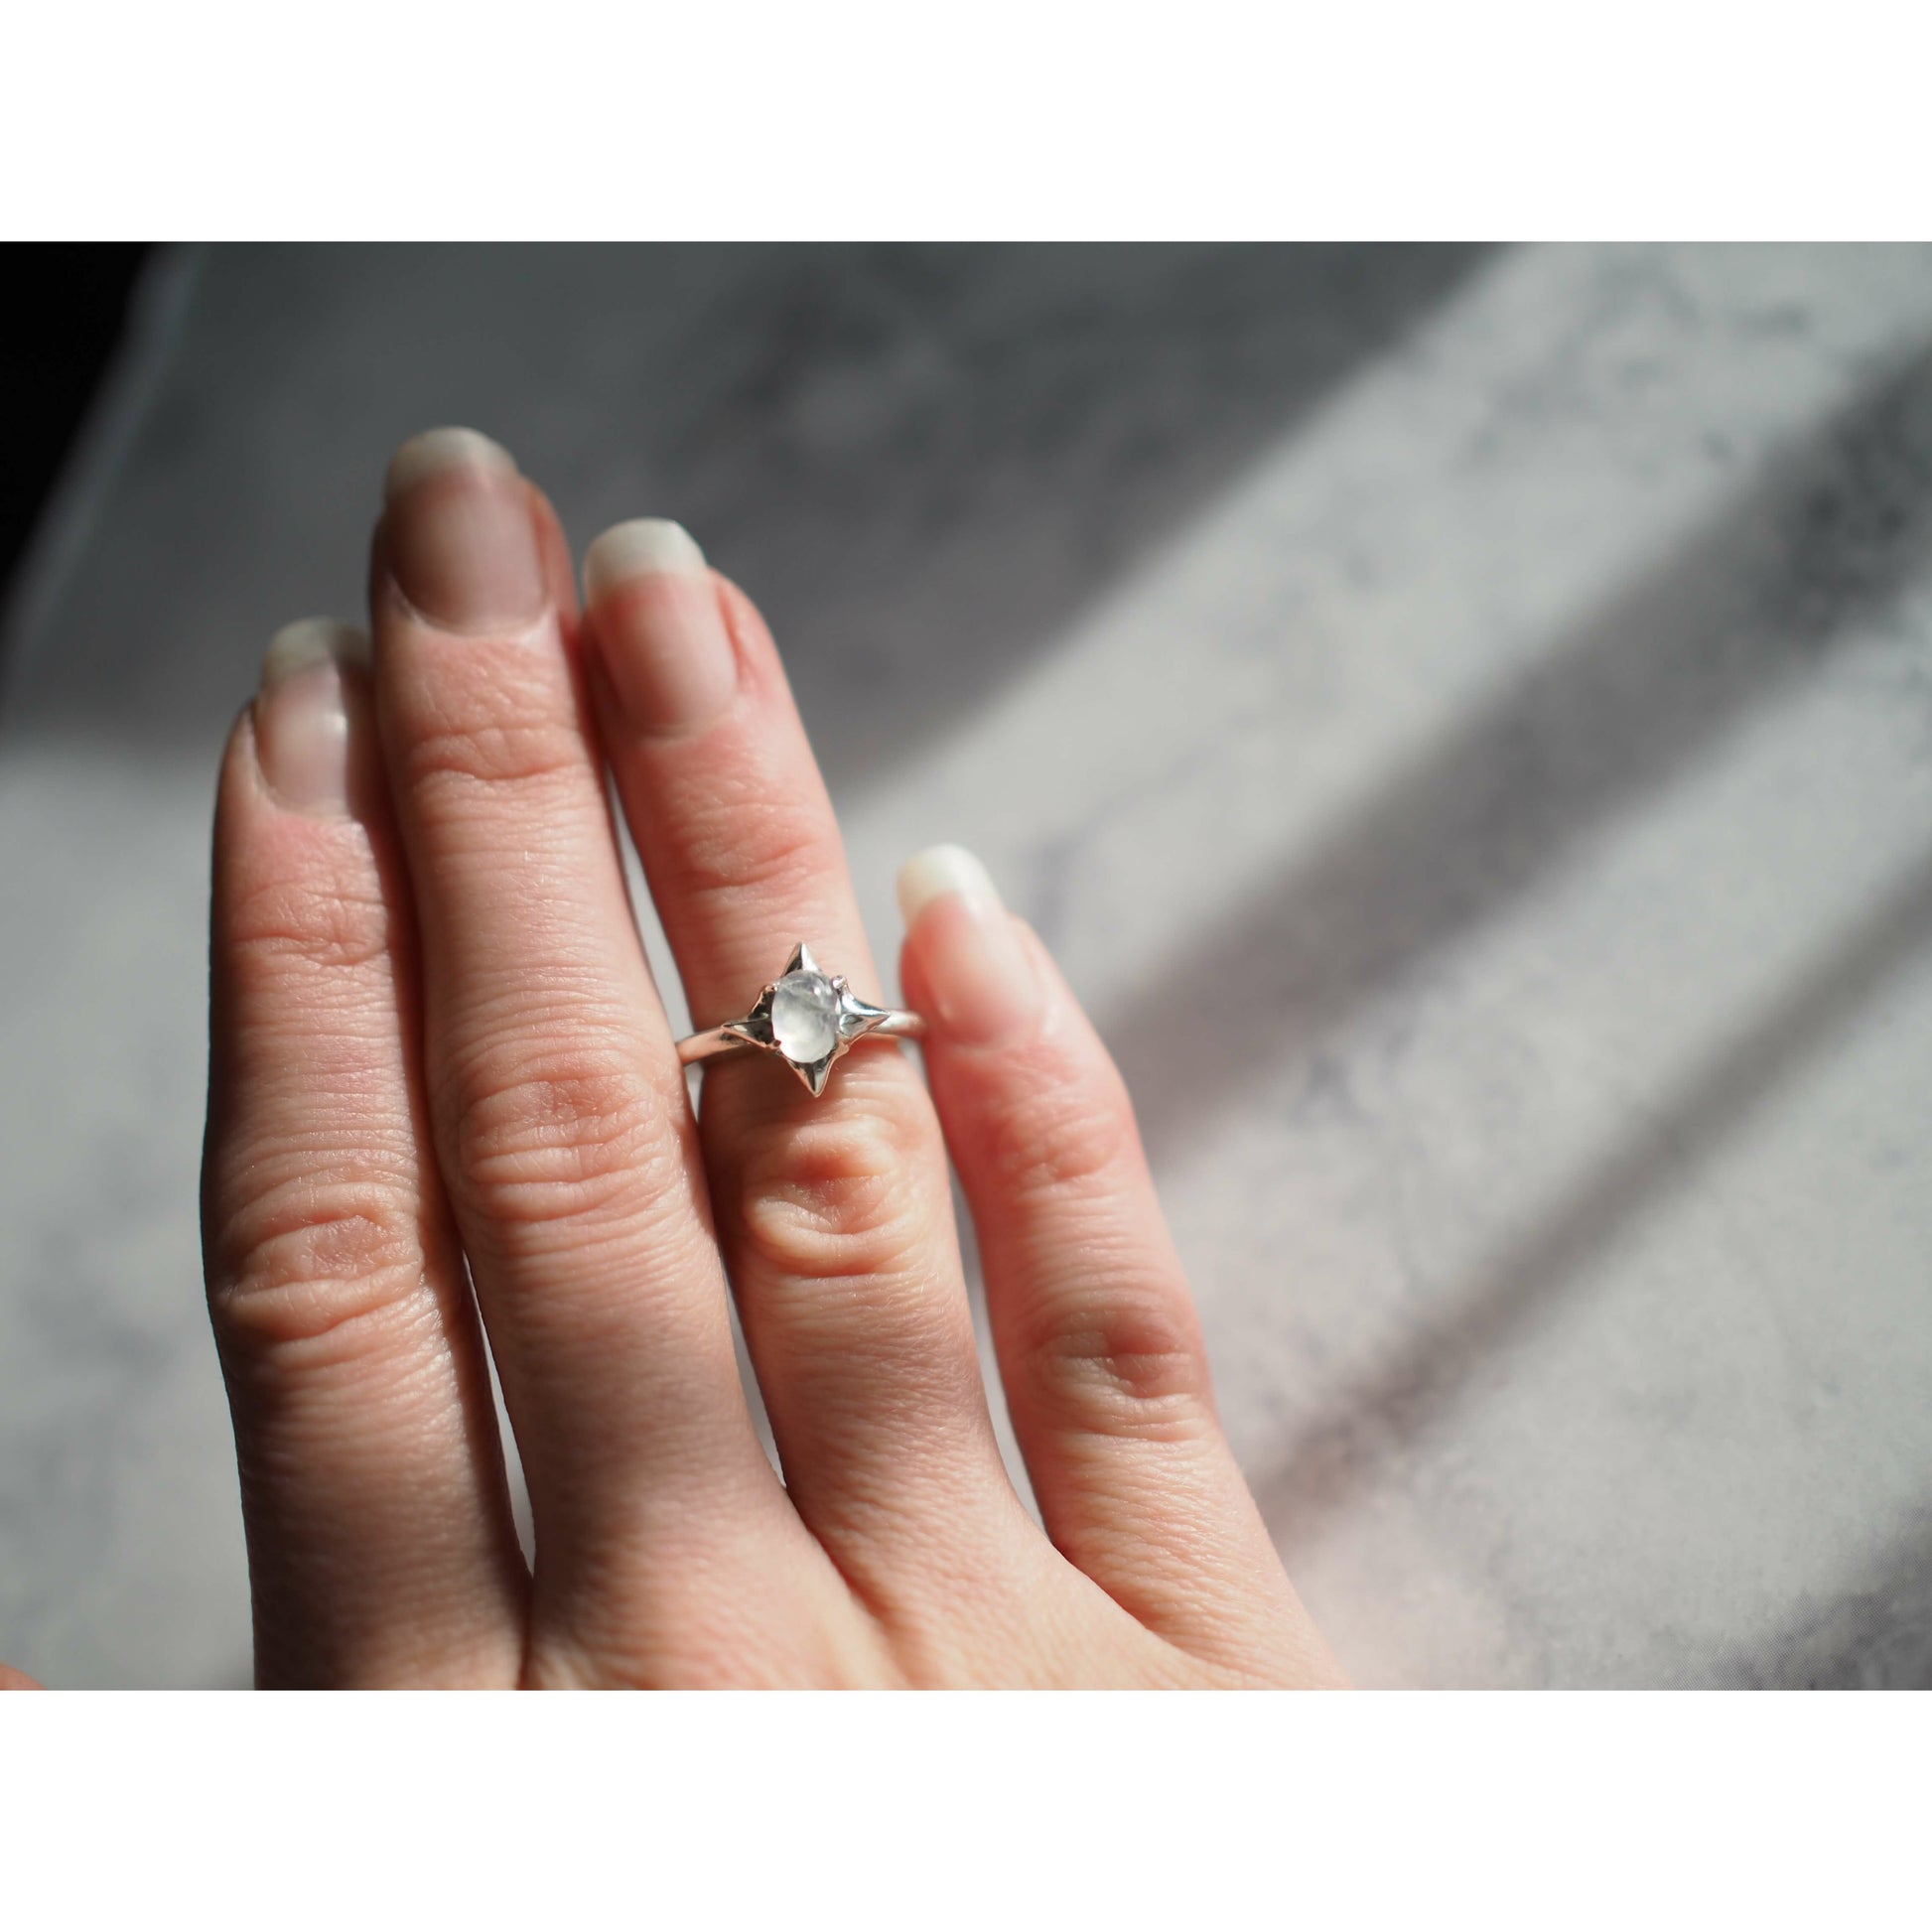 Ethically sourced moonstone star ring set in sterling silver from Iron Oxide Designs.  Shown on a model for scale